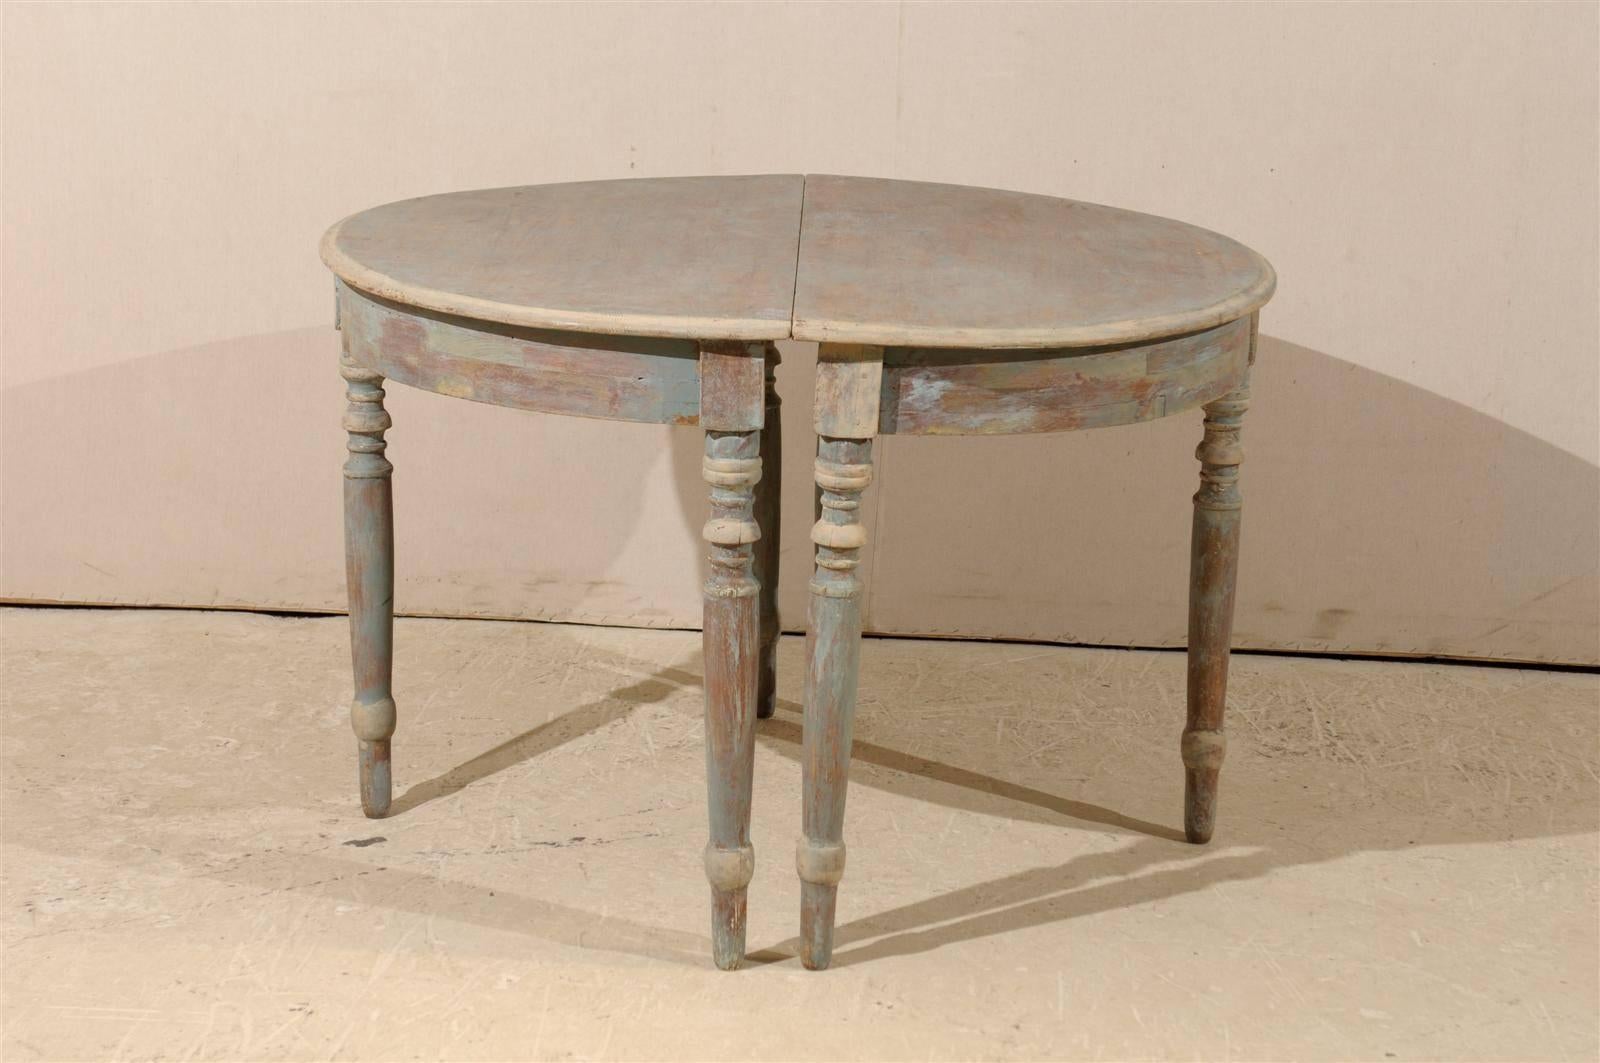 Pair of Swedish 19th Century Painted Wood Demilune Tables, Light Blue-Green 1